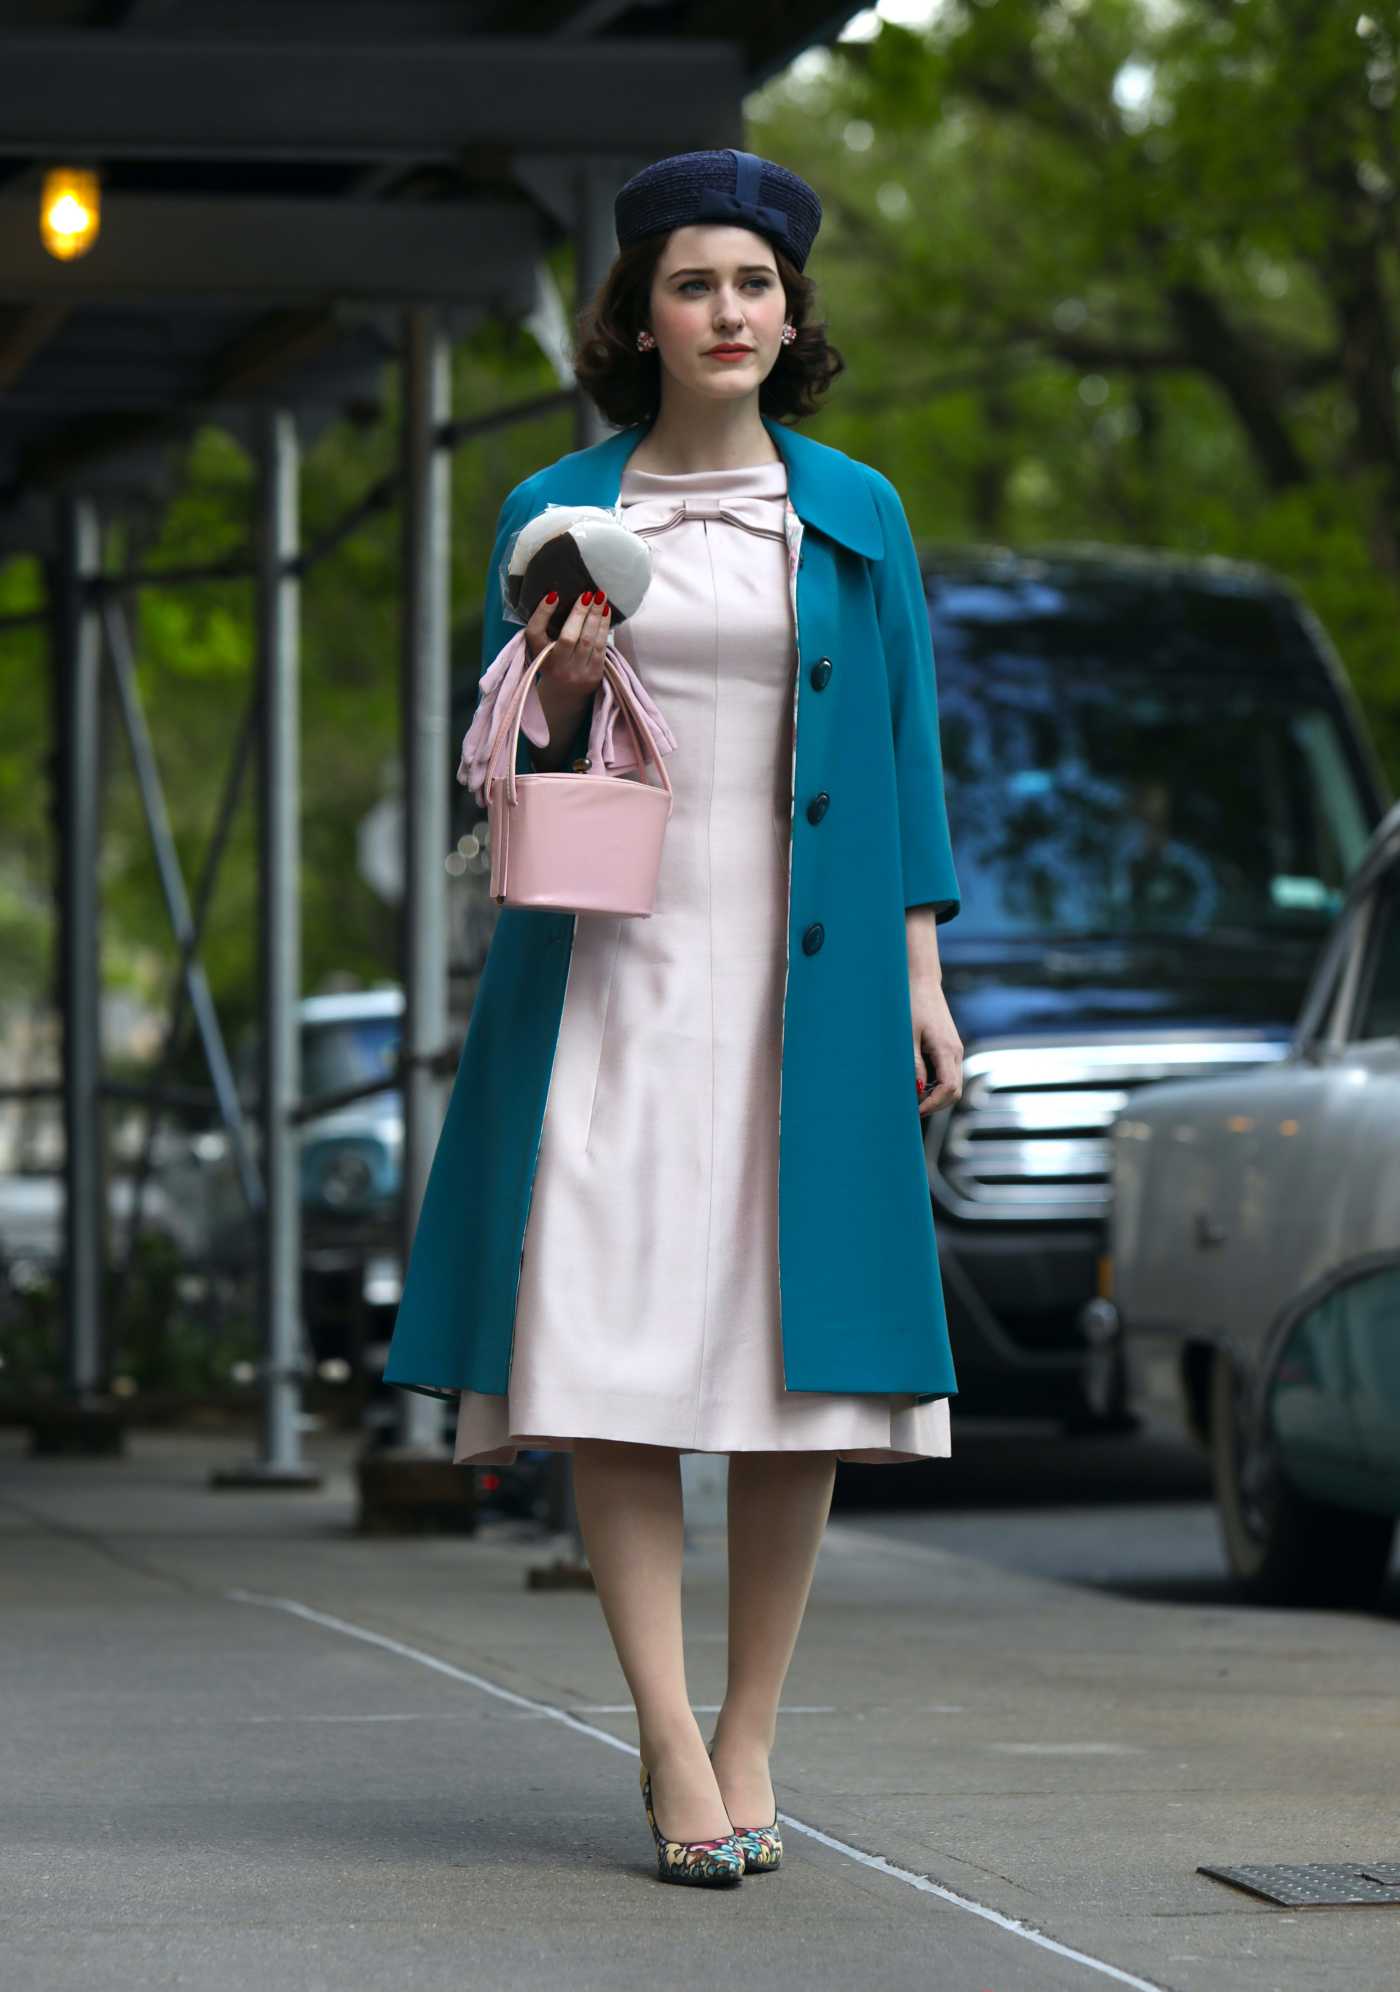 Rachel Brosnahan in a Blue Coat on the Set of The Marvelous Mrs. Maisel in New York 05/17/2021